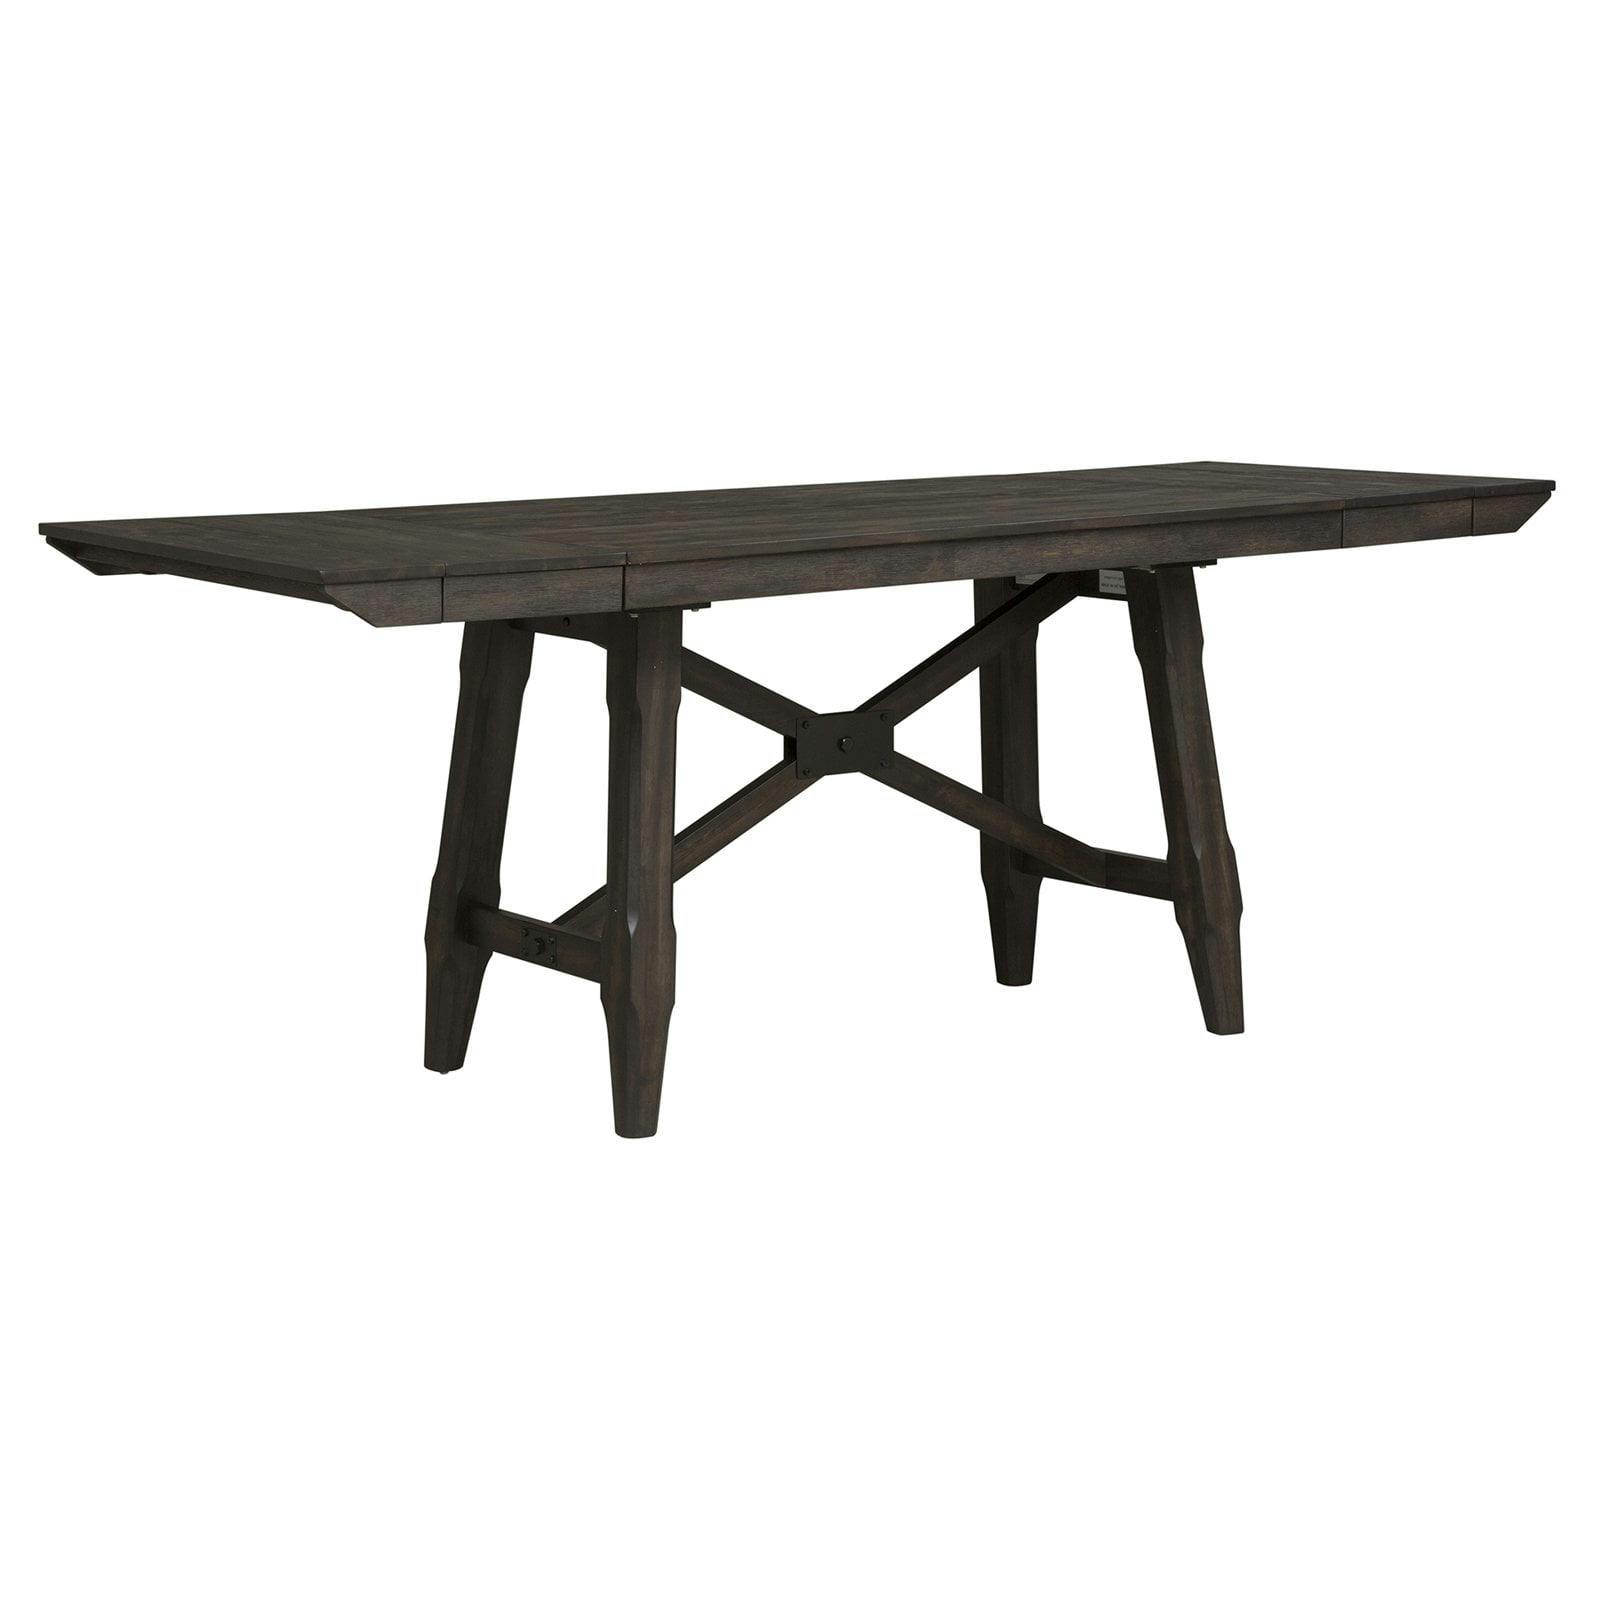 Rustic Chestnut Extendable Trestle Dining Table with X Base